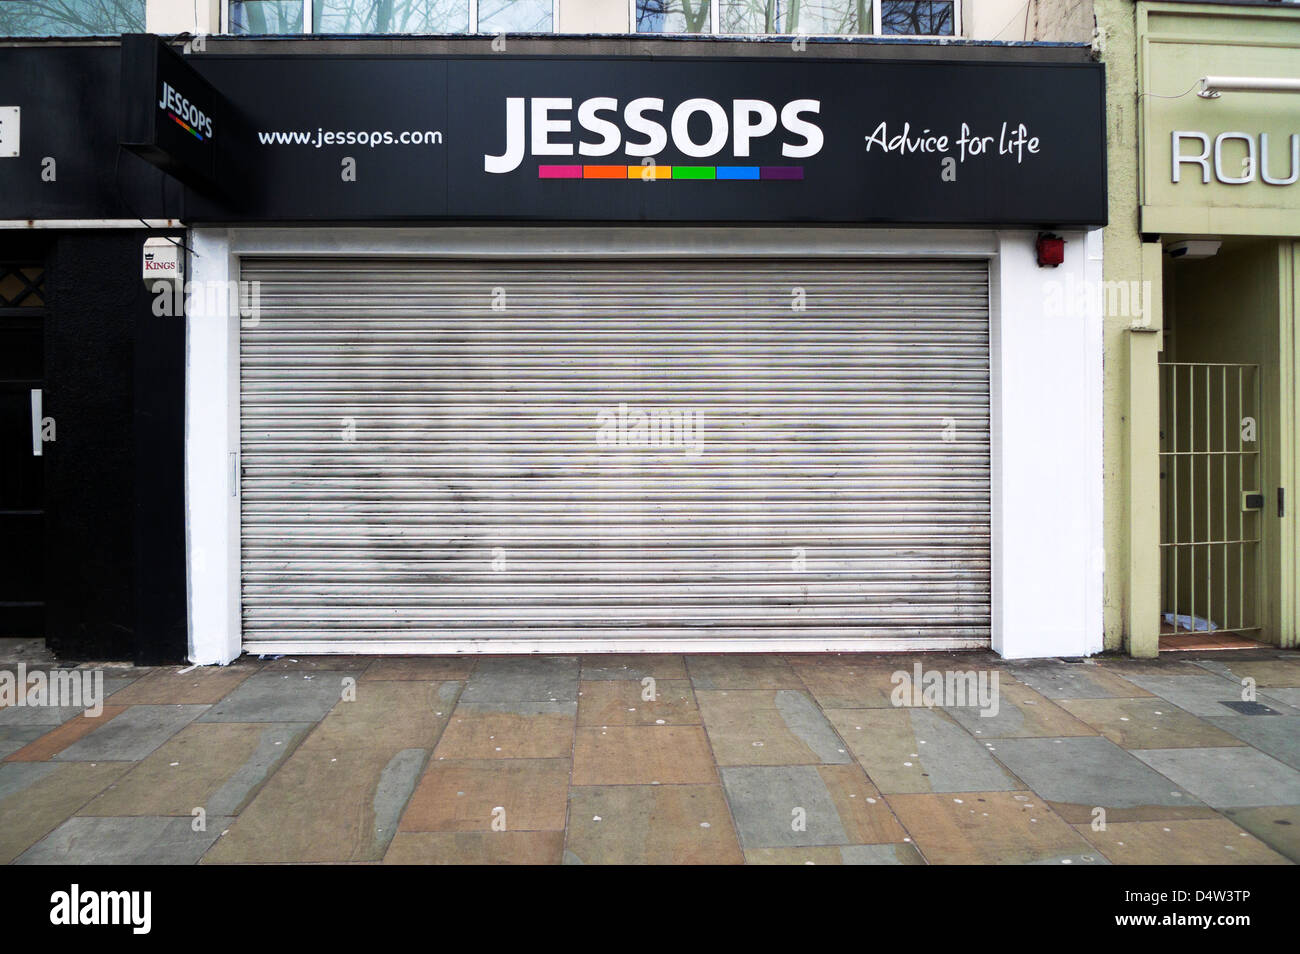 Closed Jessops shopfront with sign offering 'Advice for LIfe' Upper Street Islington London UK 2013 Stock Photo